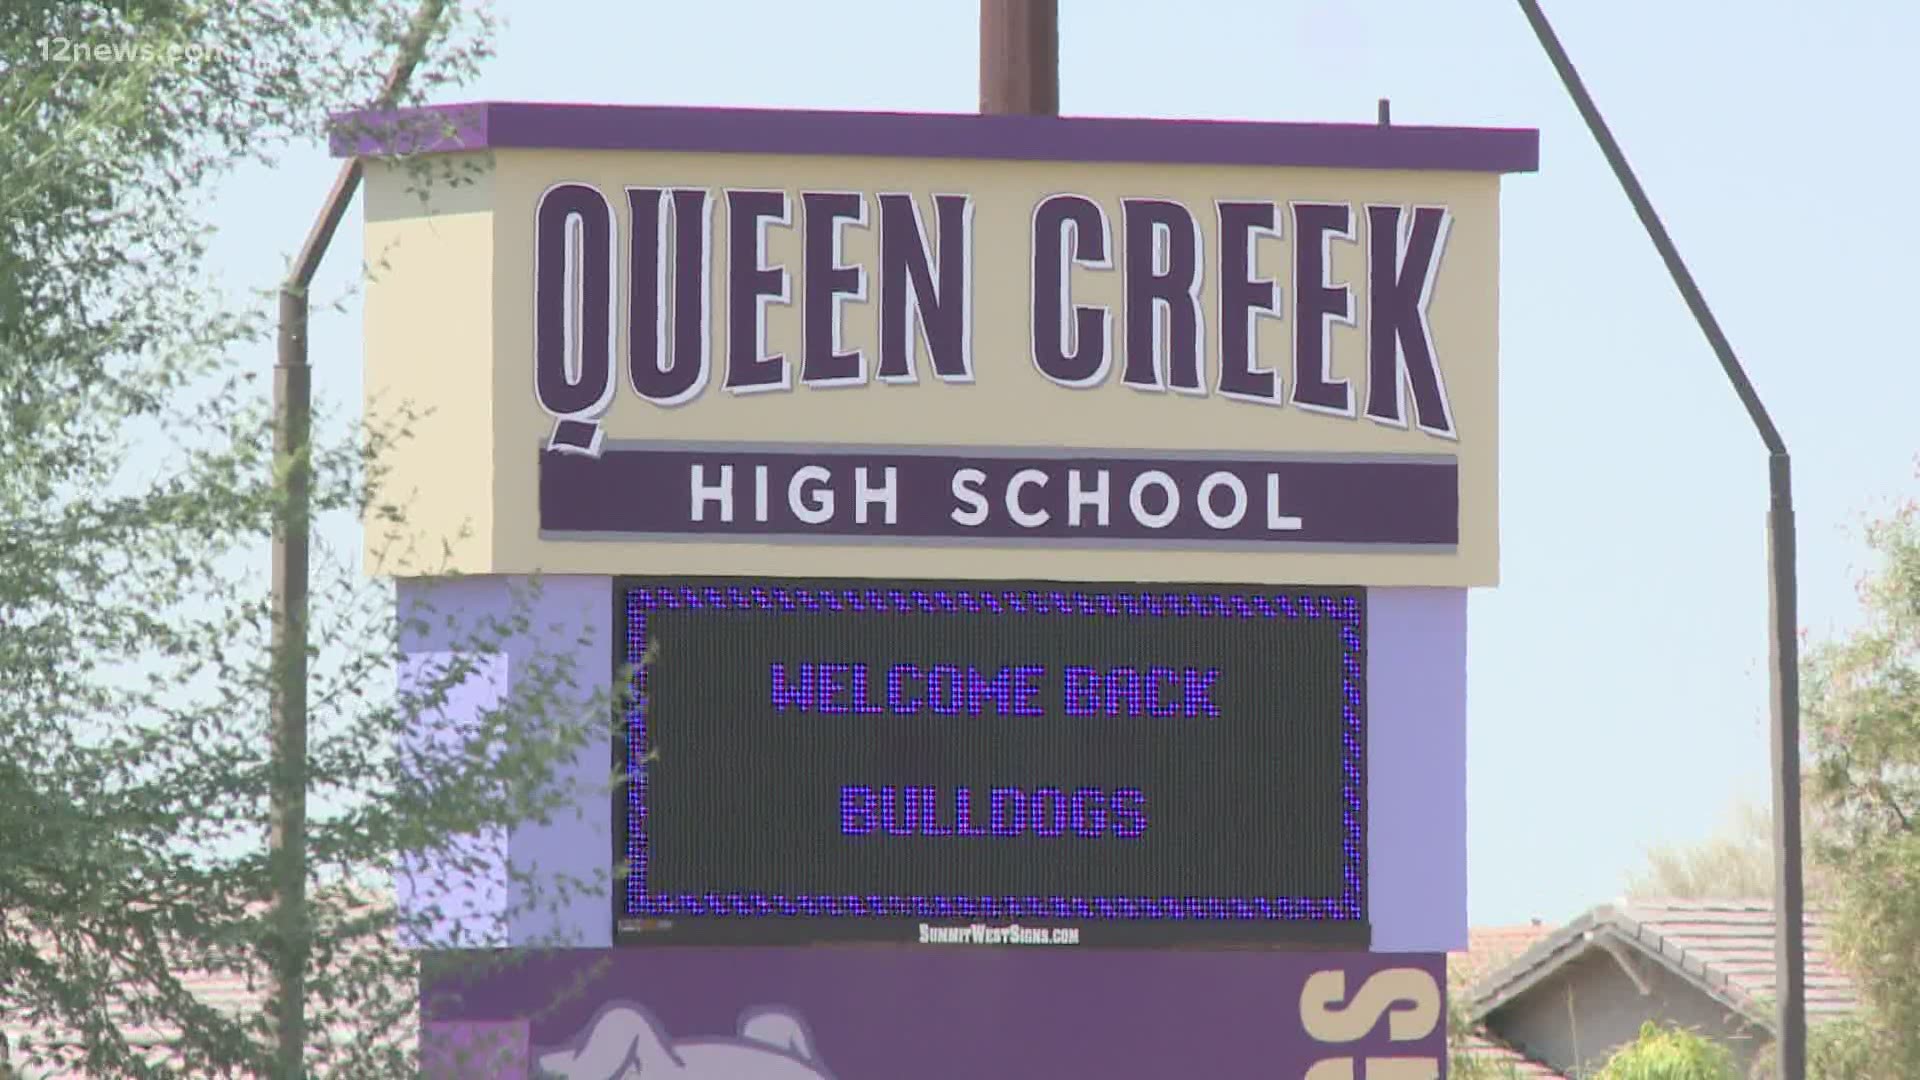 After one day back on campus, a Queen Creek High School student is having second thoughts. She says inconsistent mask wearing caused her to opt for online learning.